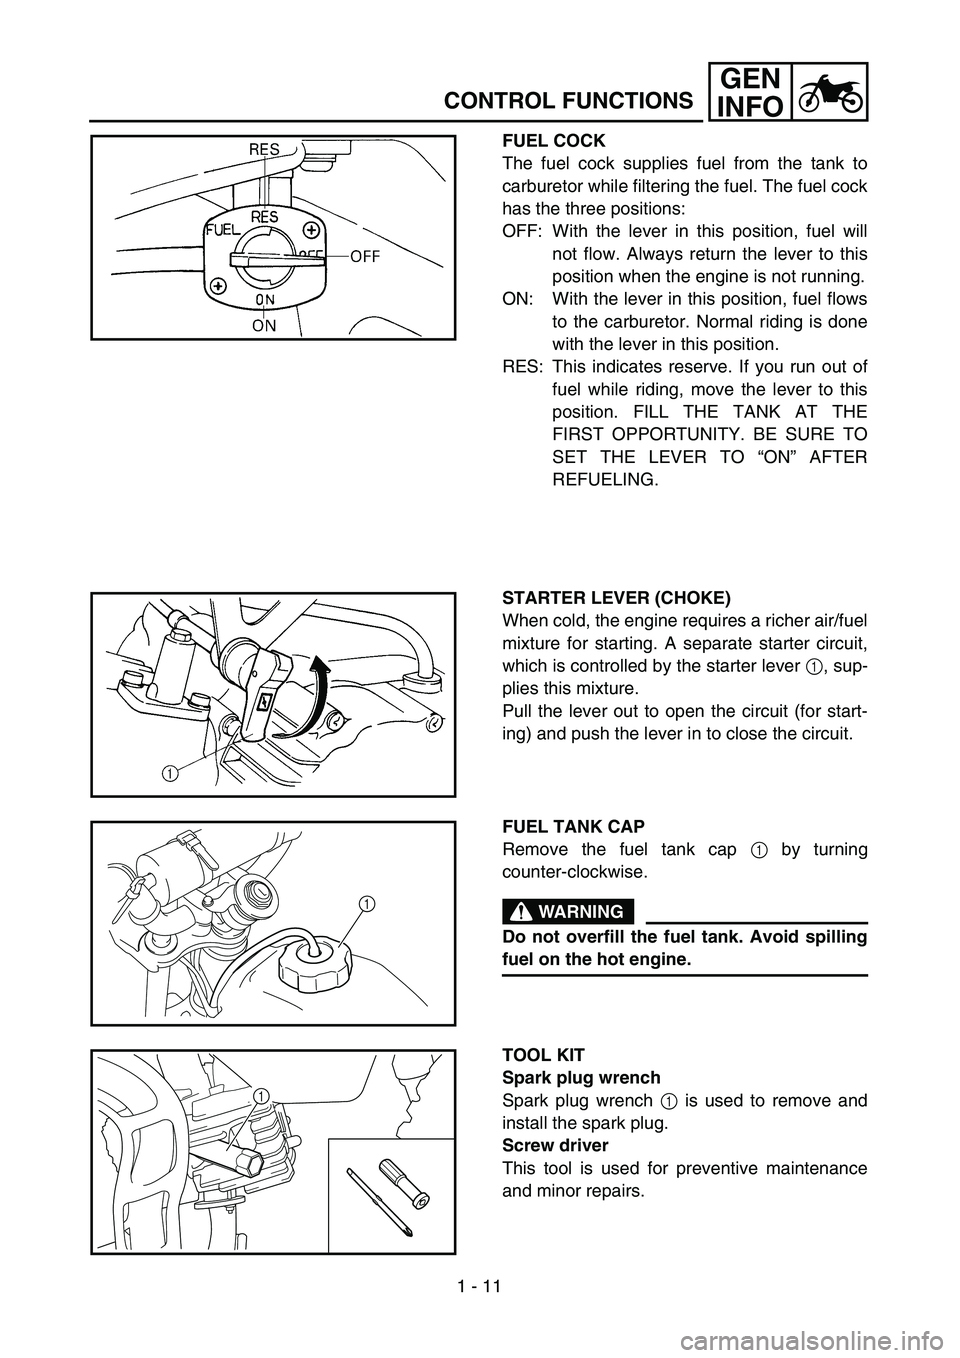 YAMAHA TTR90 2004 Service Manual 1 - 11
GEN
INFO
CONTROL FUNCTIONS
FUEL COCK
The fuel cock supplies fuel from the tank to
carburetor while filtering the fuel. The fuel cock
has the three positions:
OFF: With the lever in this positio